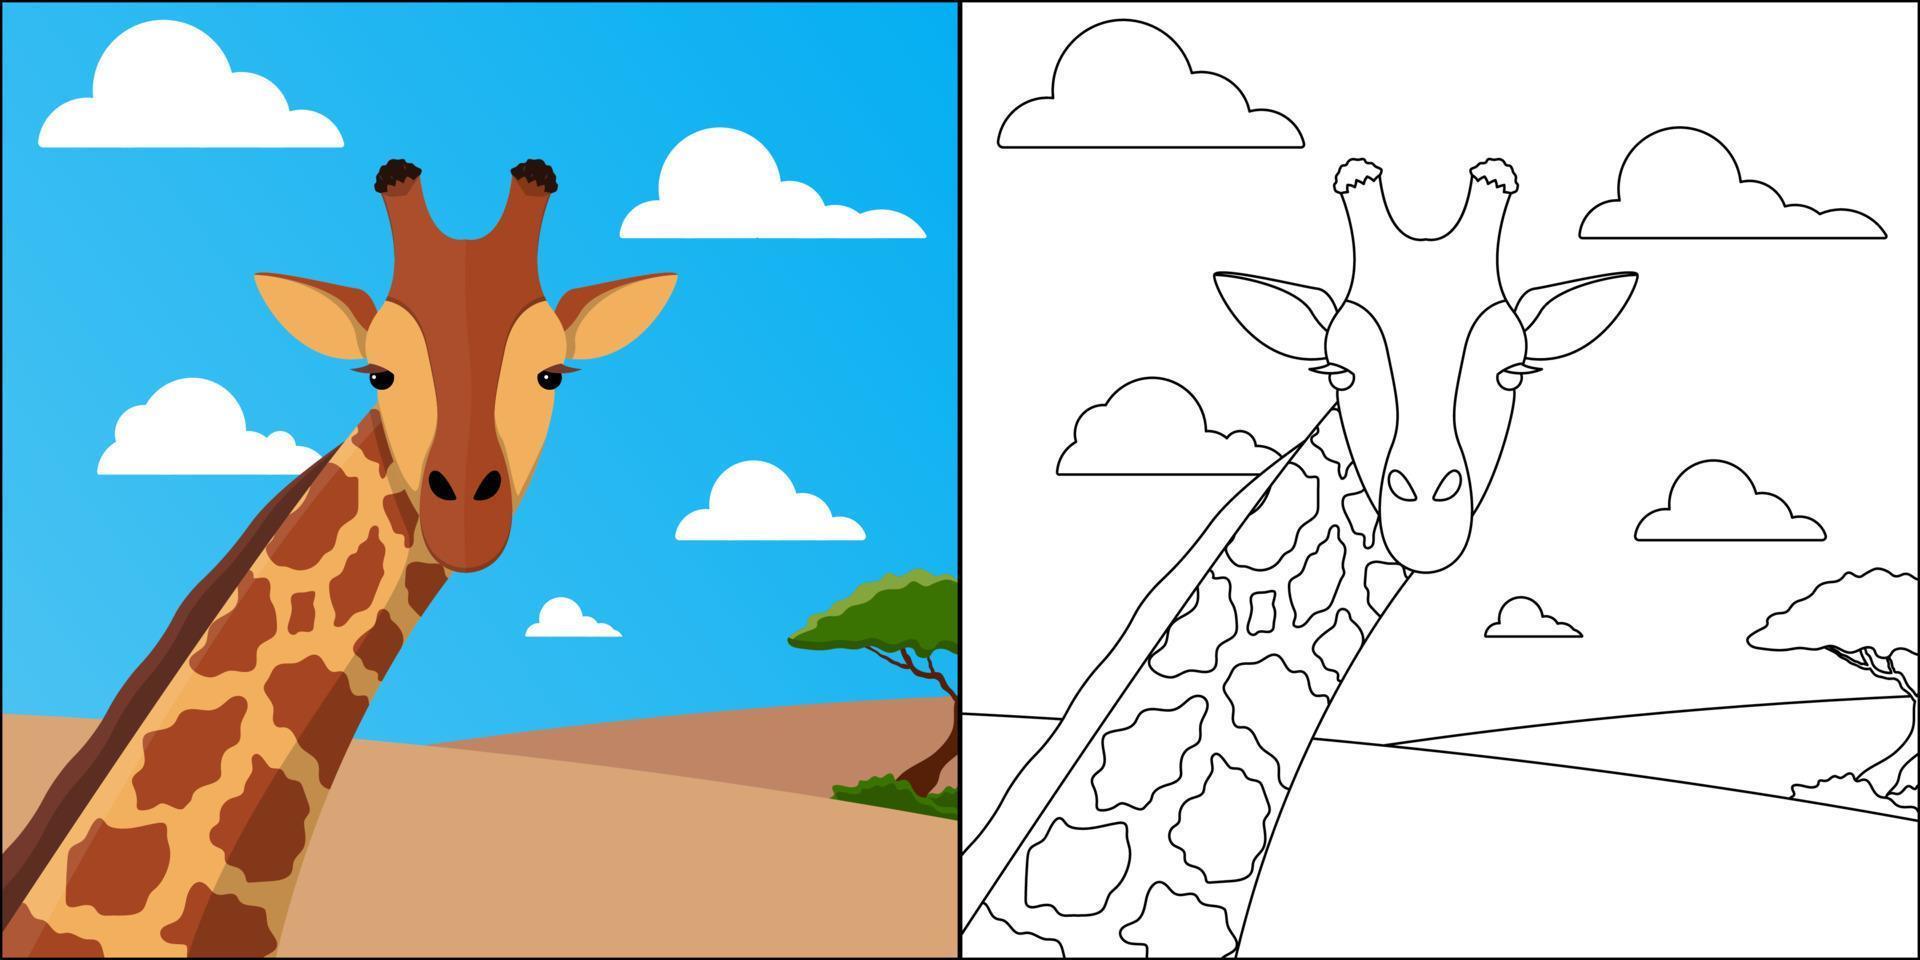 Giraffe in the desert suitable for children's coloring page vector illustration